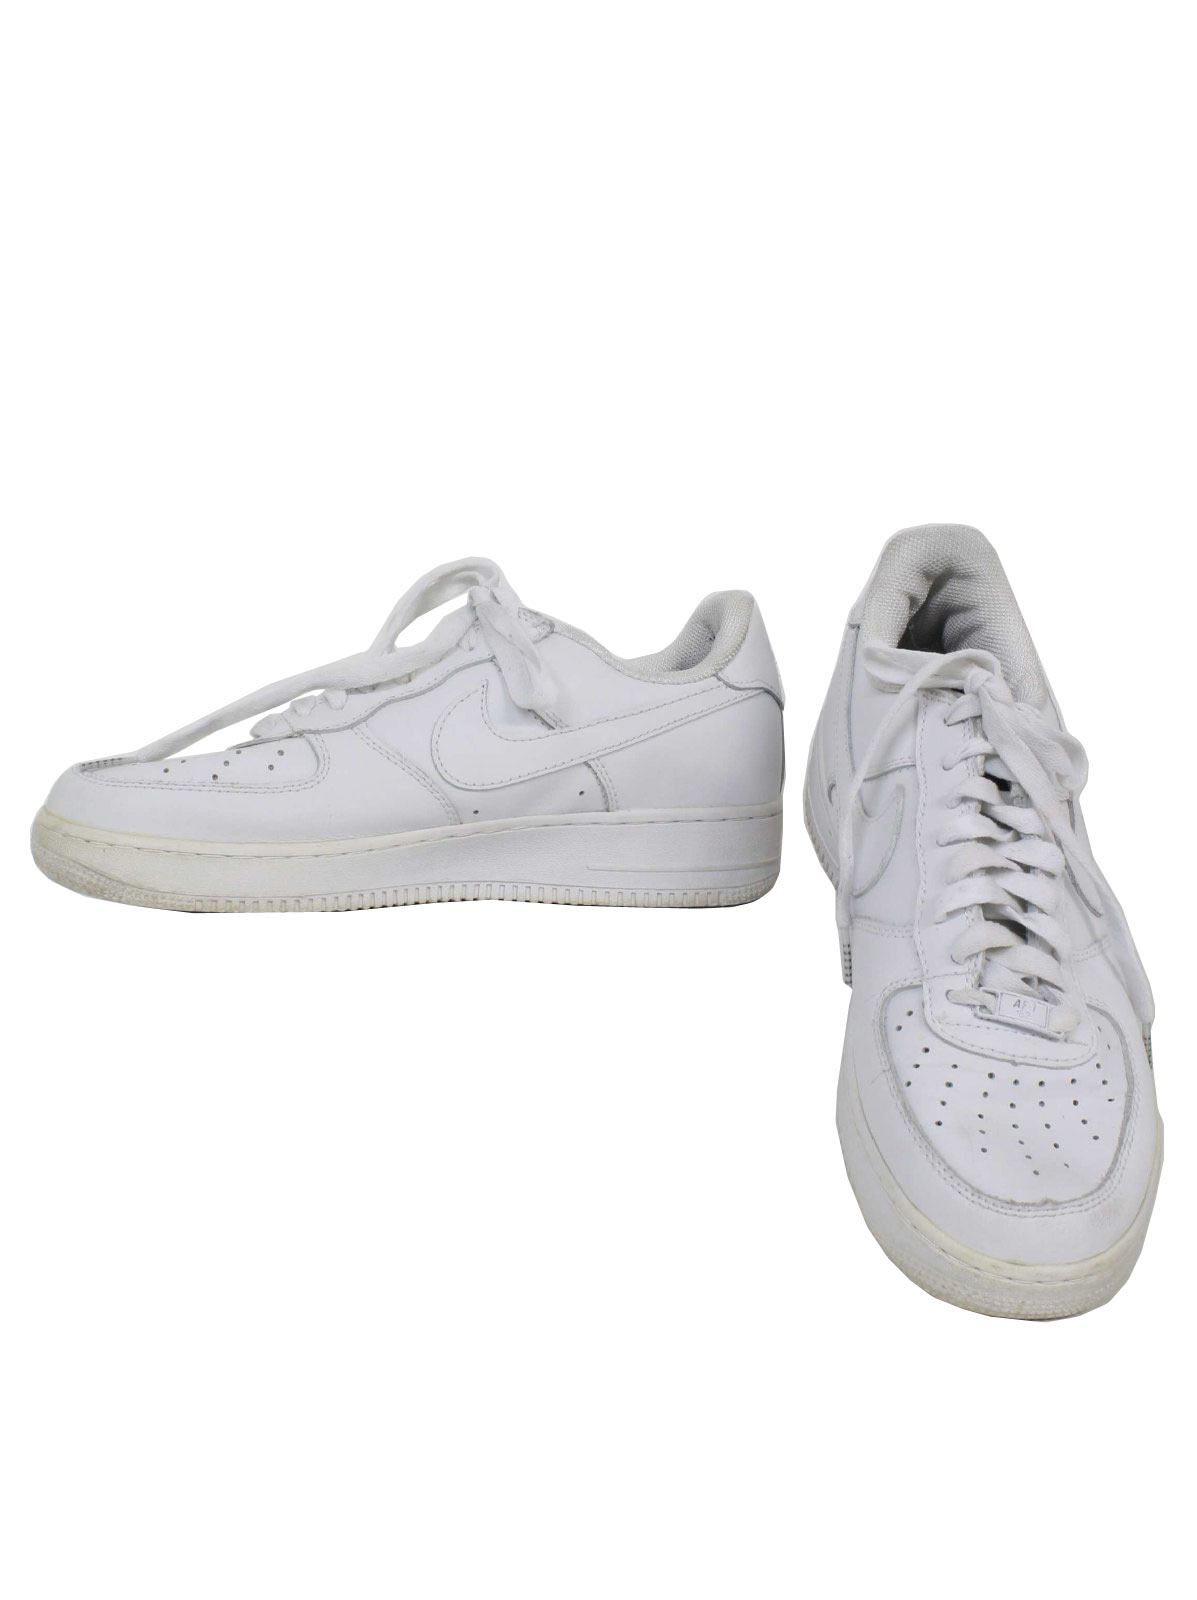 1990's Shoes (Nike Air Force : 90s -Nike Air Force 1- white on white flat bottom classic old school style tennis shoes with mesh dot upper bridge -AF